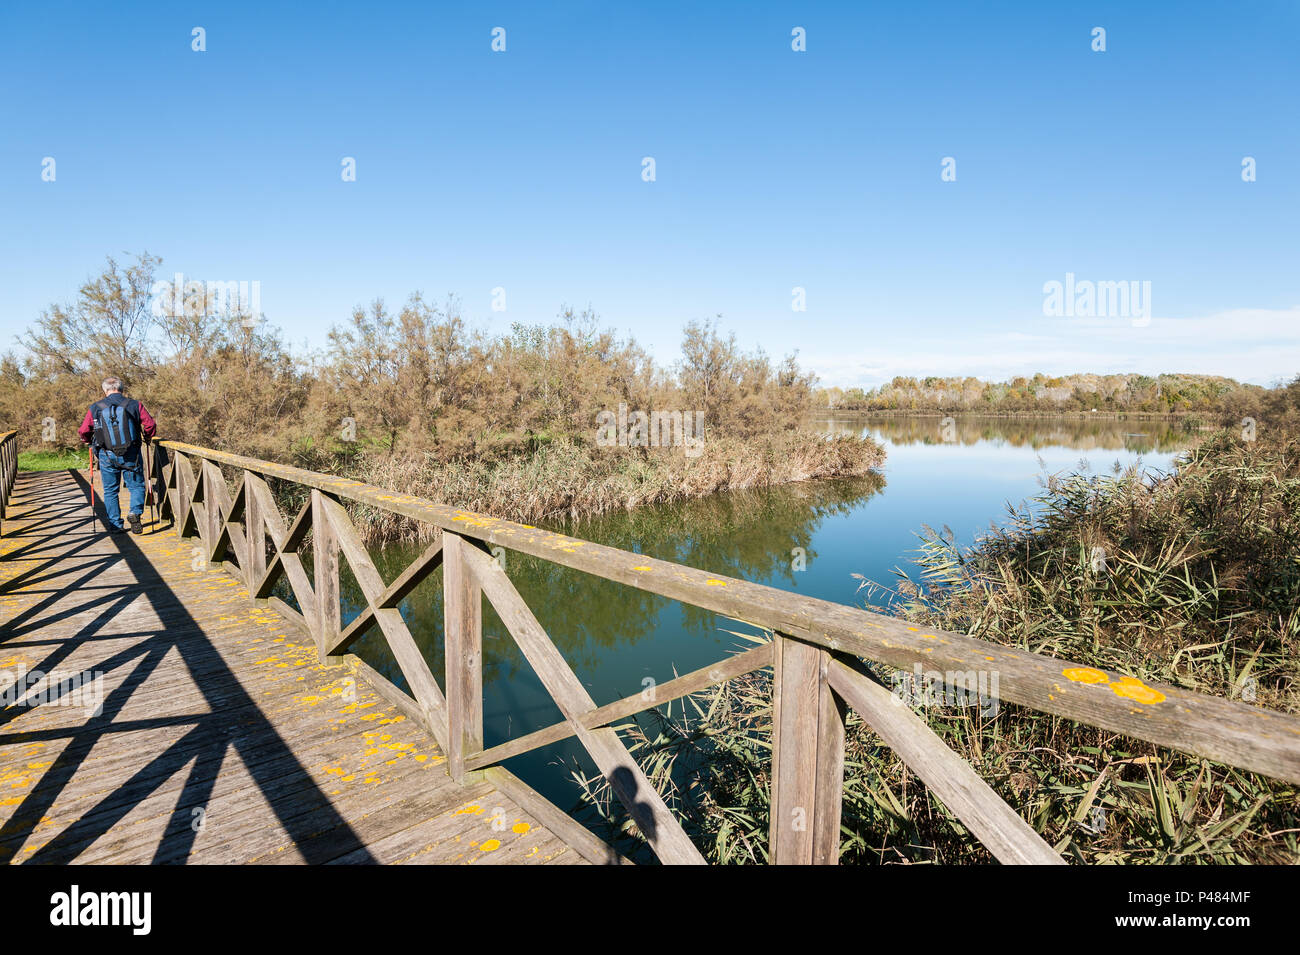 Hiker (60 years old) on a wooden footbridge on the river.  Rear view. Stock Photo